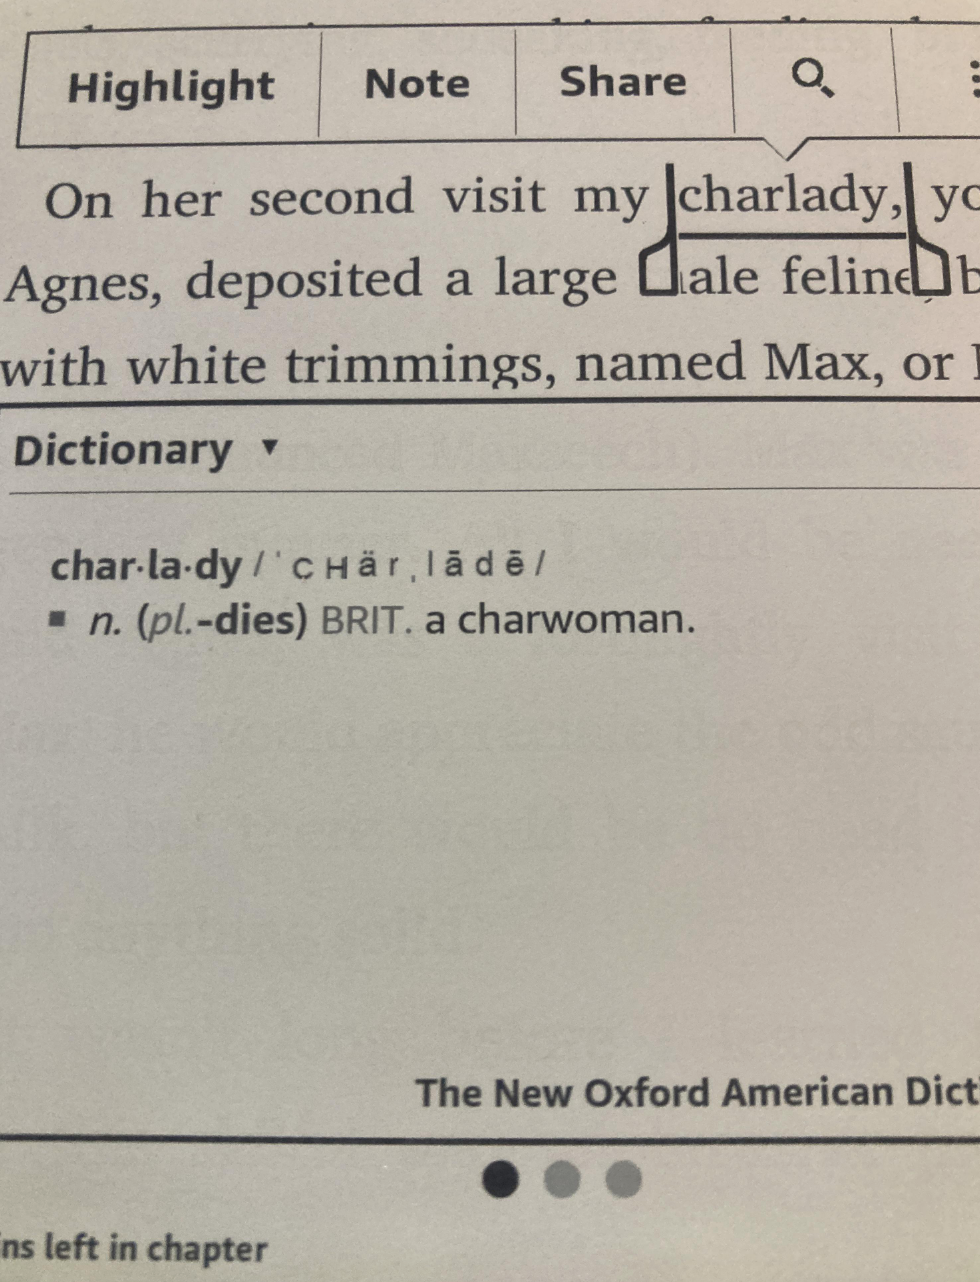 Dictionary defining &quot;charlady&quot; as British for &quot;charwoman&quot;